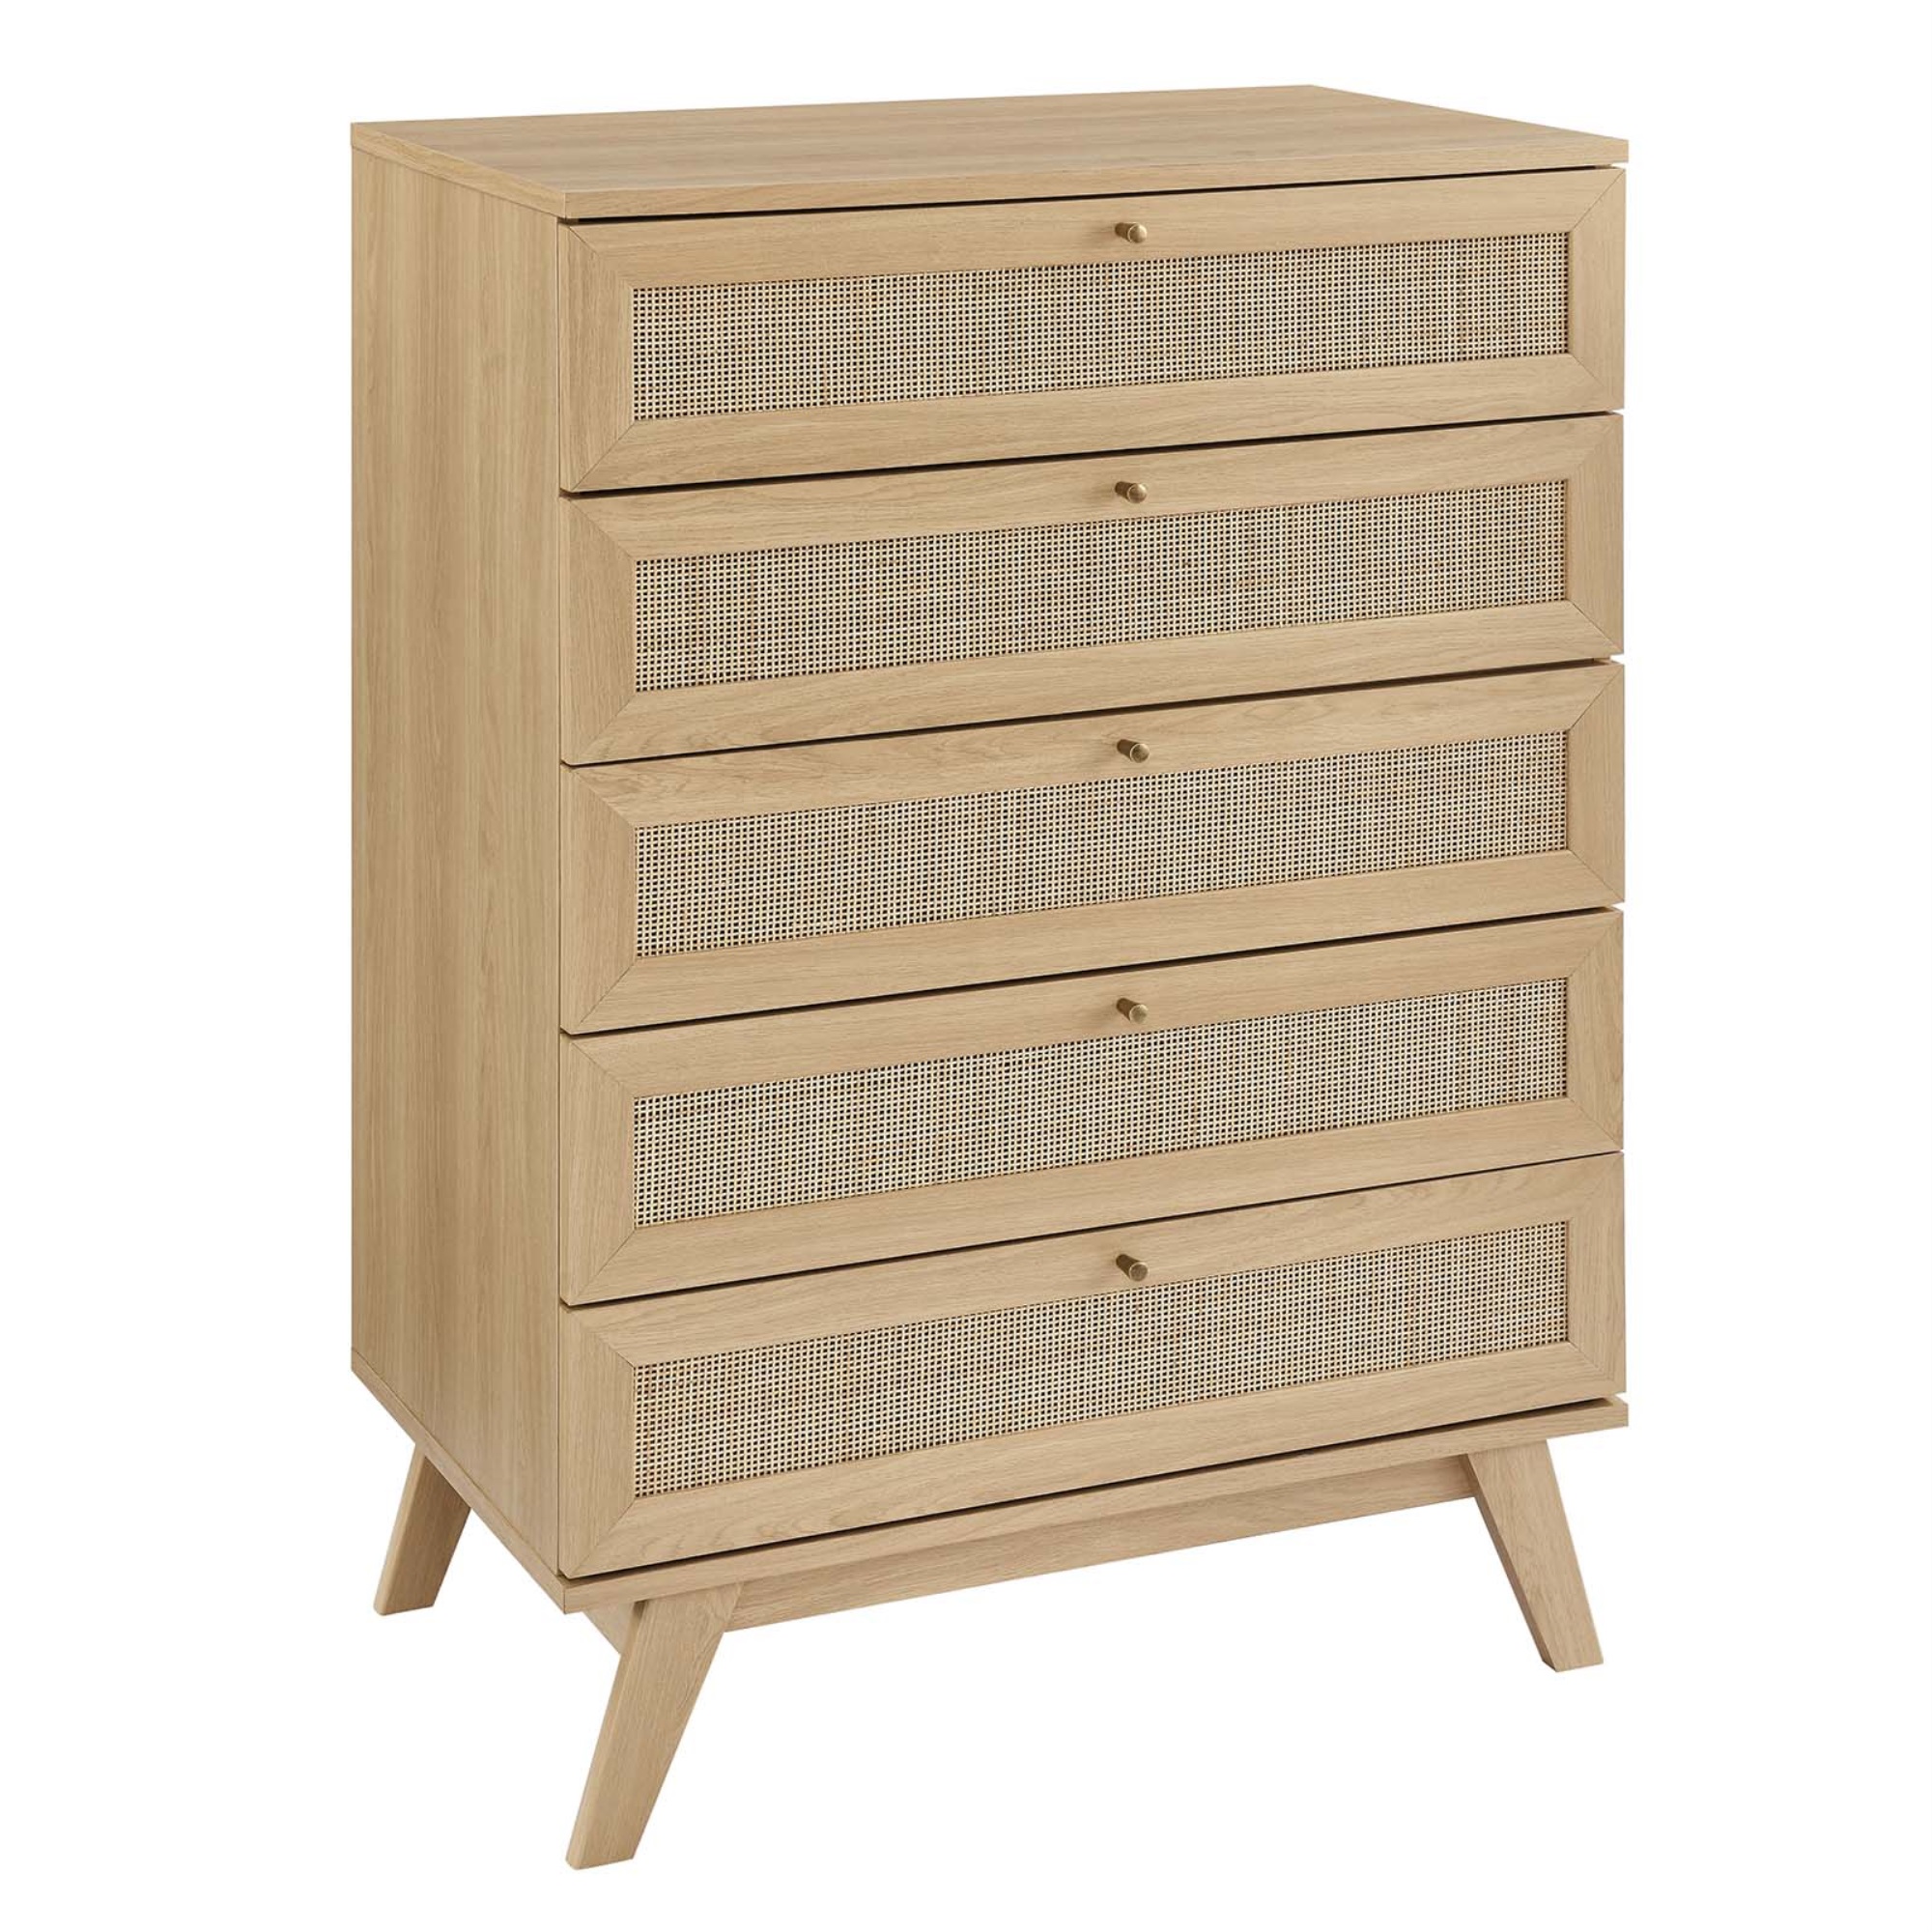 Ergode 5-Drawer Chest with Rattan Weave Fronts - Durable MDF and Particleboard Construction - Ample Storage Space - Natu